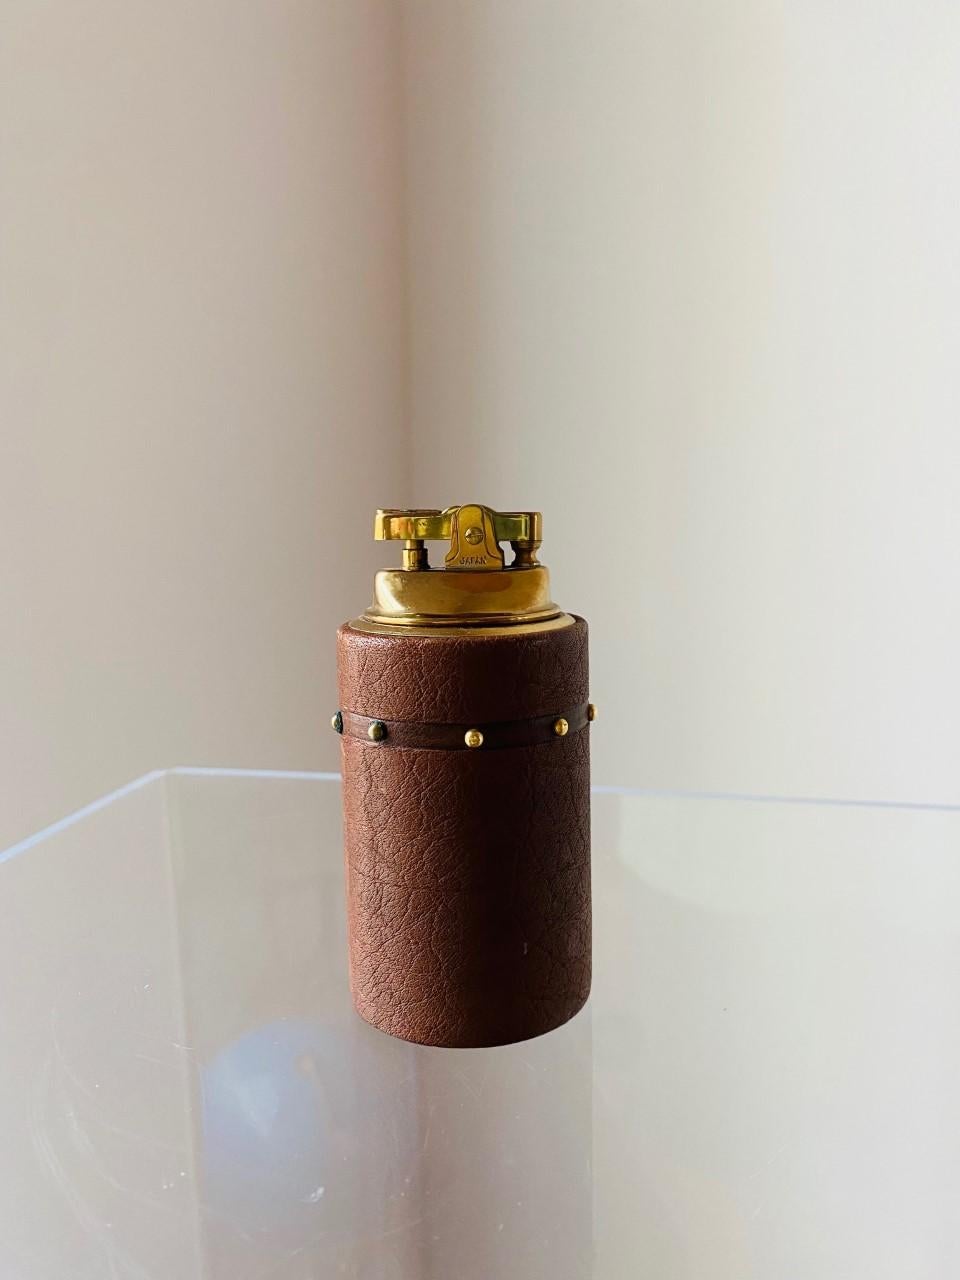 Beautiful and glamorous lighter. This piece has midcentury glamour and style all over it. The sizeable piece is enveloped in a brown leather with stud brass details and a felted base. This piece is from Japan and the craftmanship is incredible. The